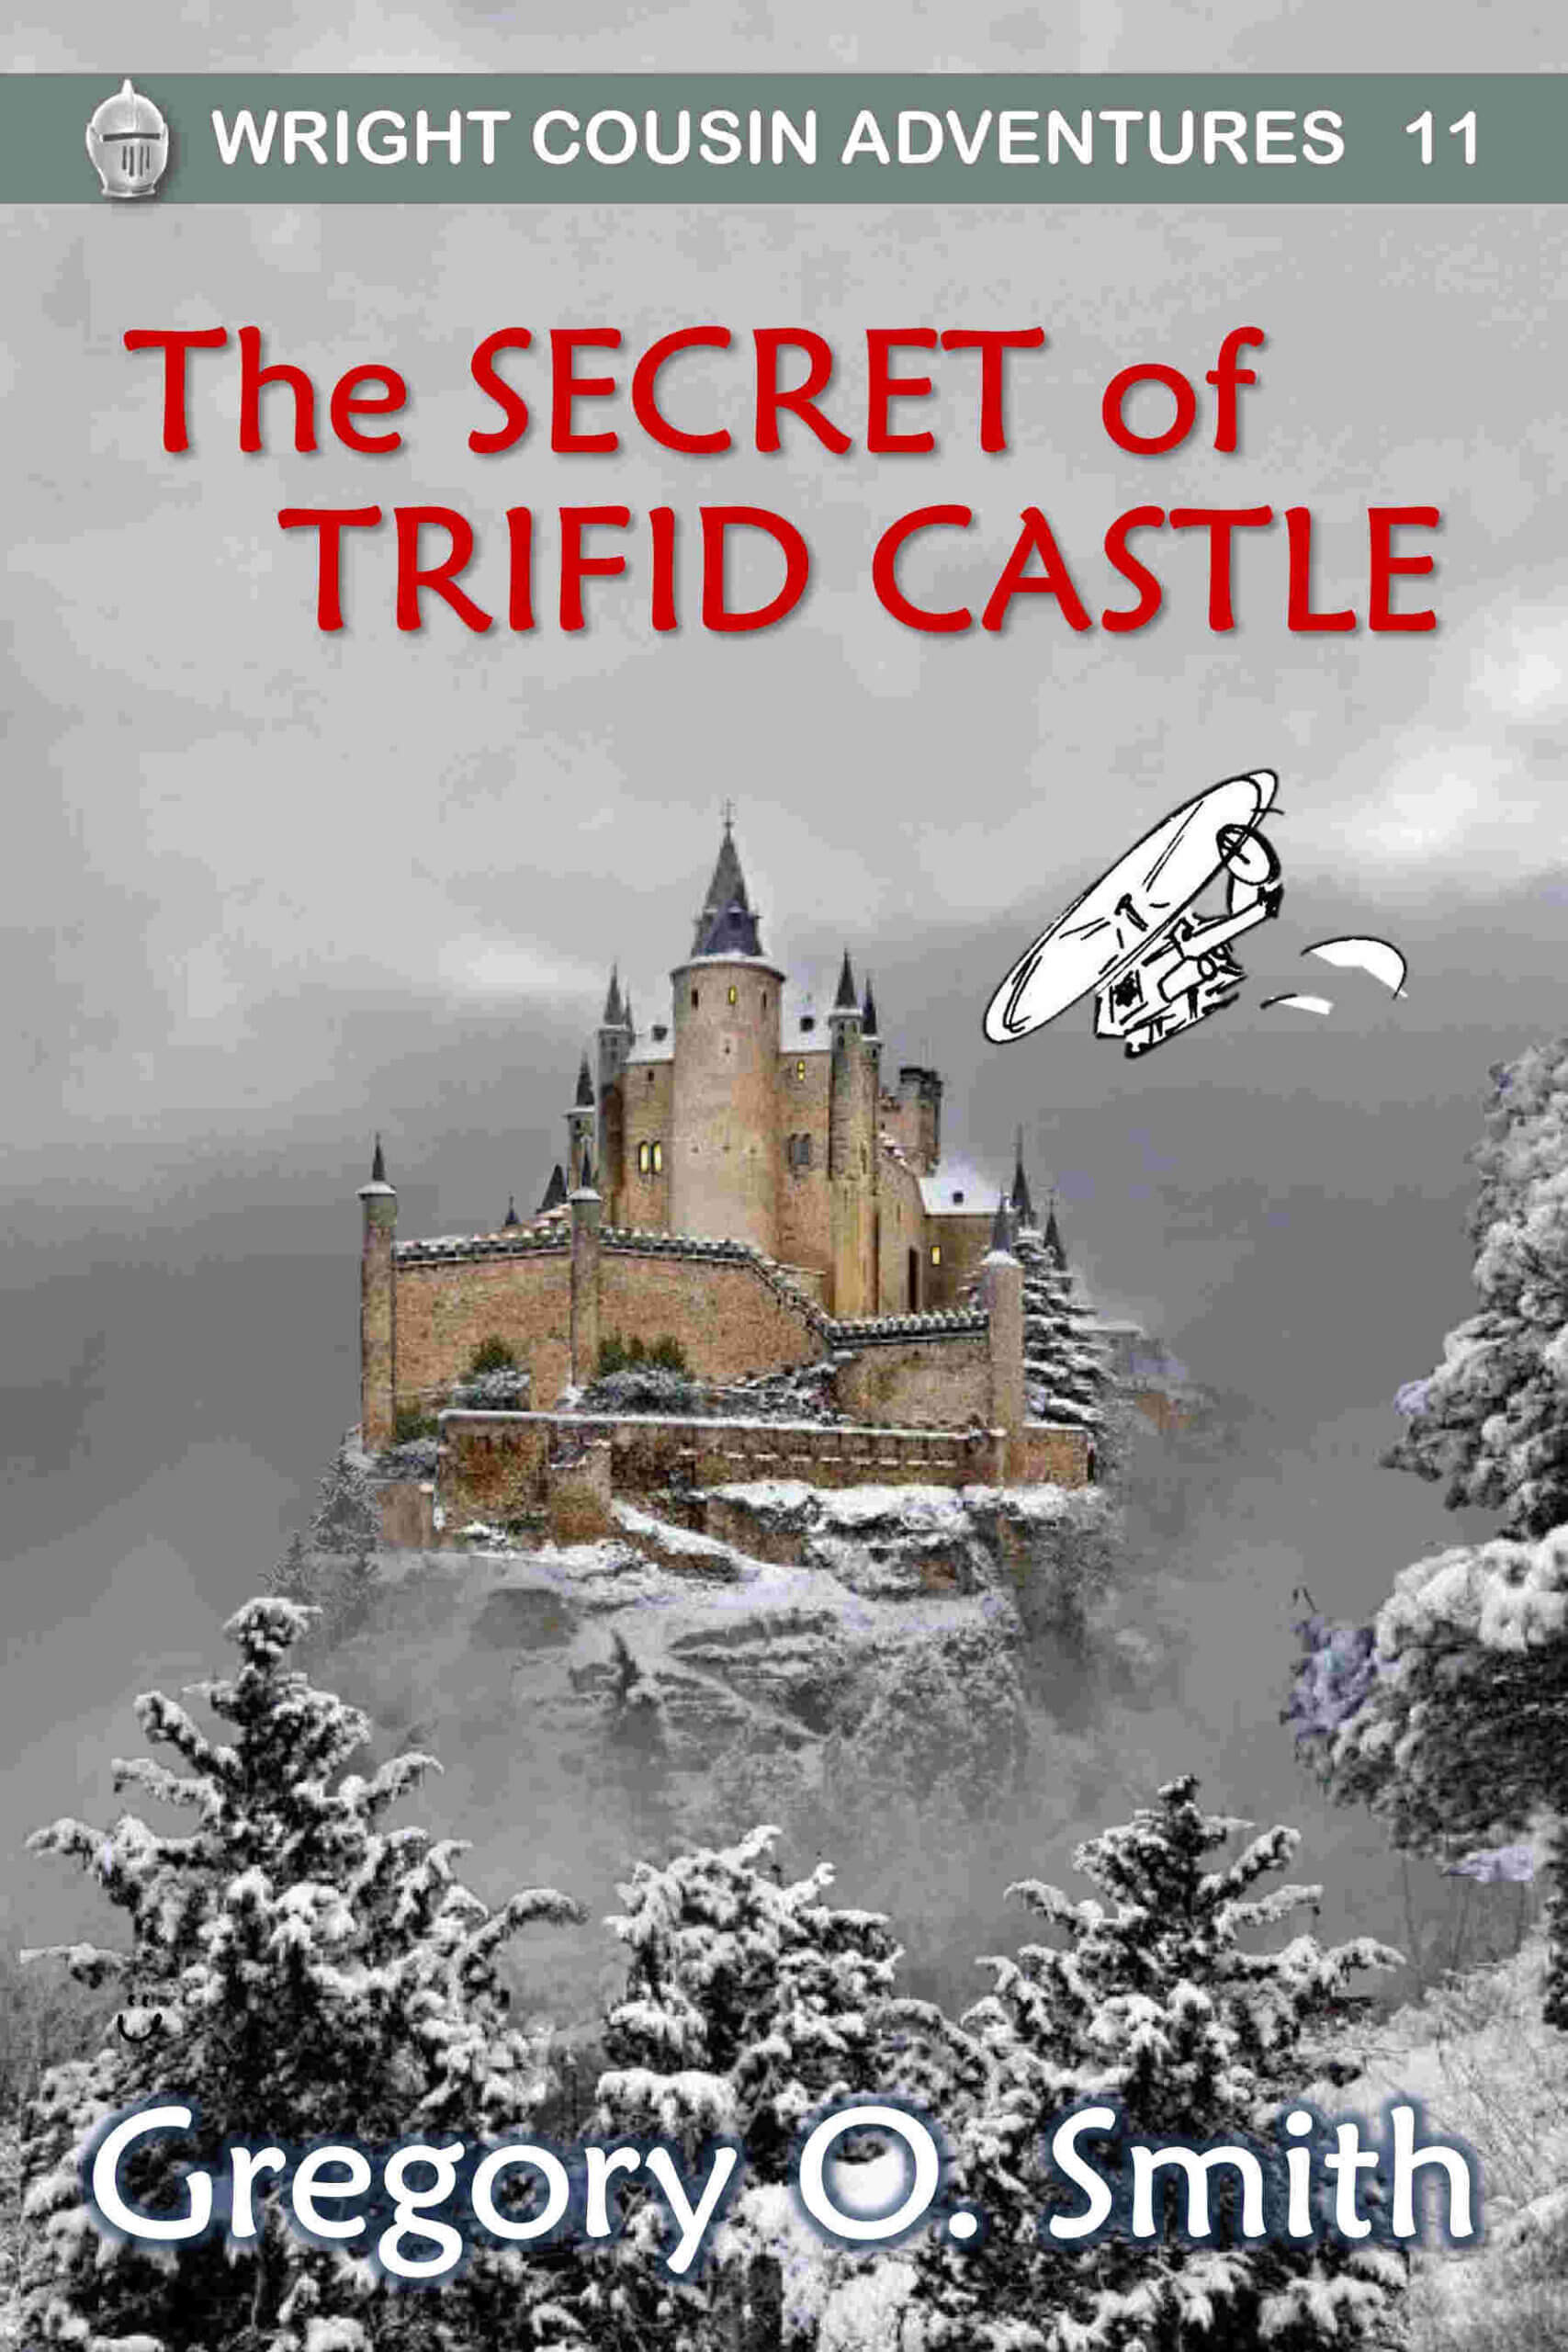 Castle in snow with flying helicopter